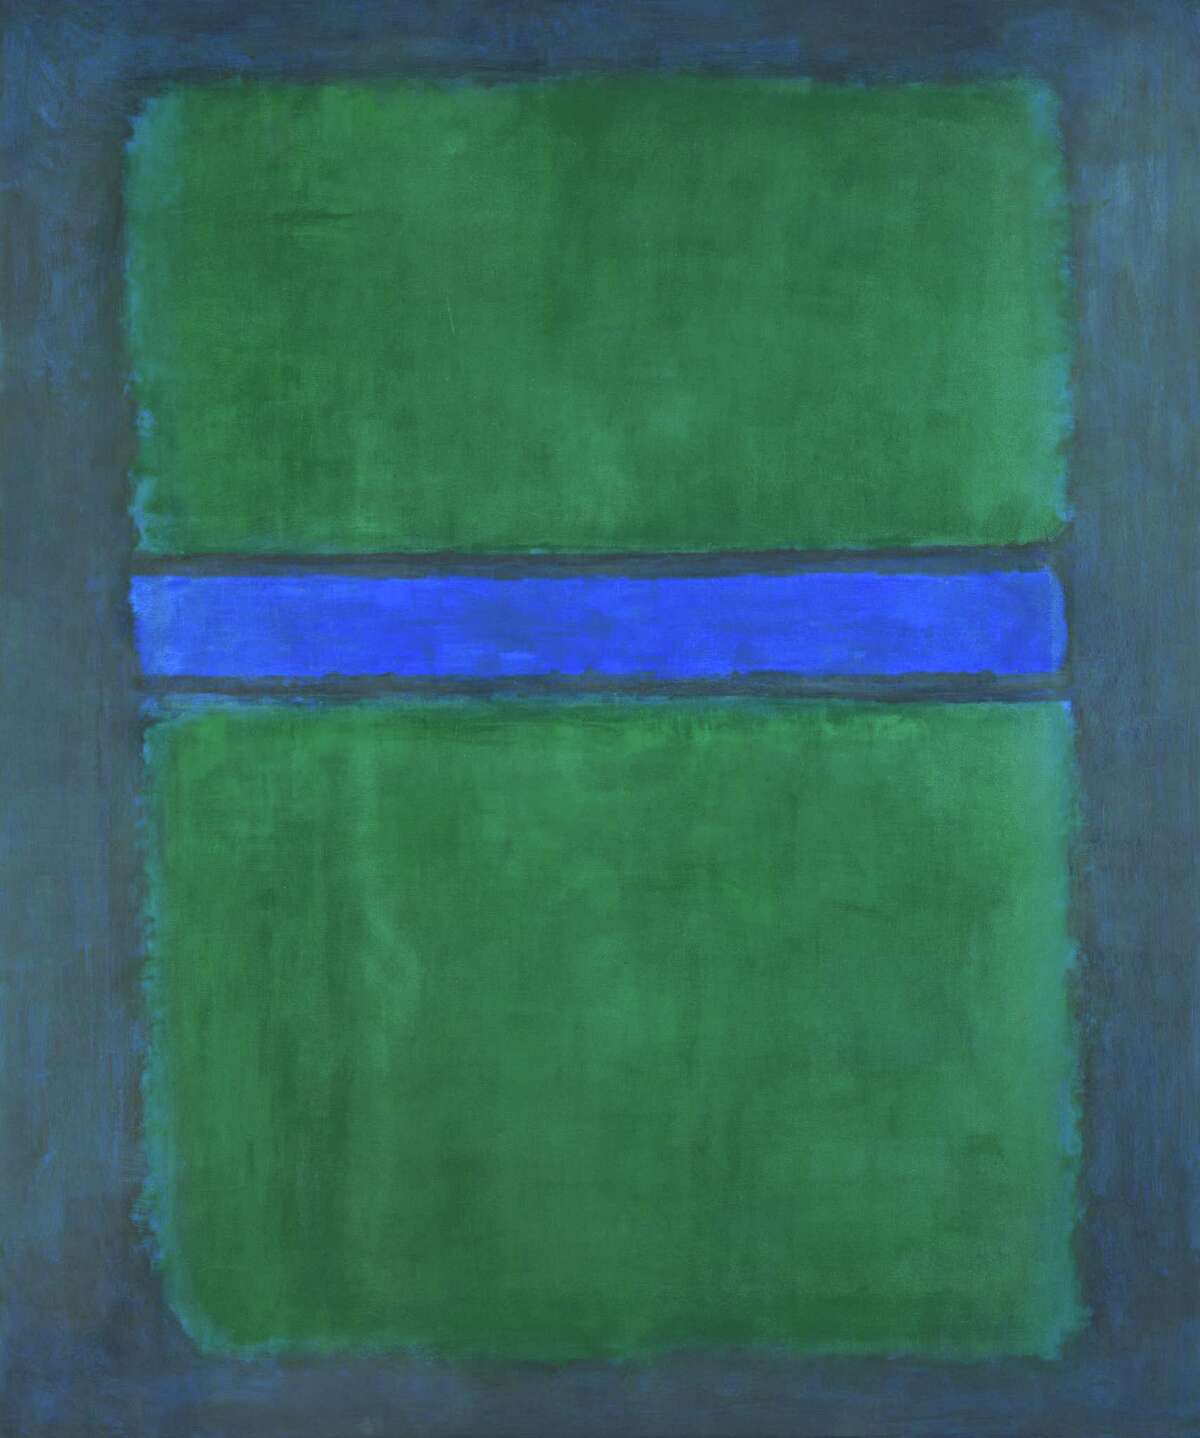 Among works that will be on view Sept. 20 - Jan. 24 in the exhibition "Mark Rothko: A Retrospective" at the Museum of Fine Arts, Houston is this untitled canvas from 1957 (oil on canvas, National Gallery of Art, Washington, Gift of The Mark Rothko Foundation, Inc. Â 1998 by Kate Rothko Prizel and Christopher Rothko)